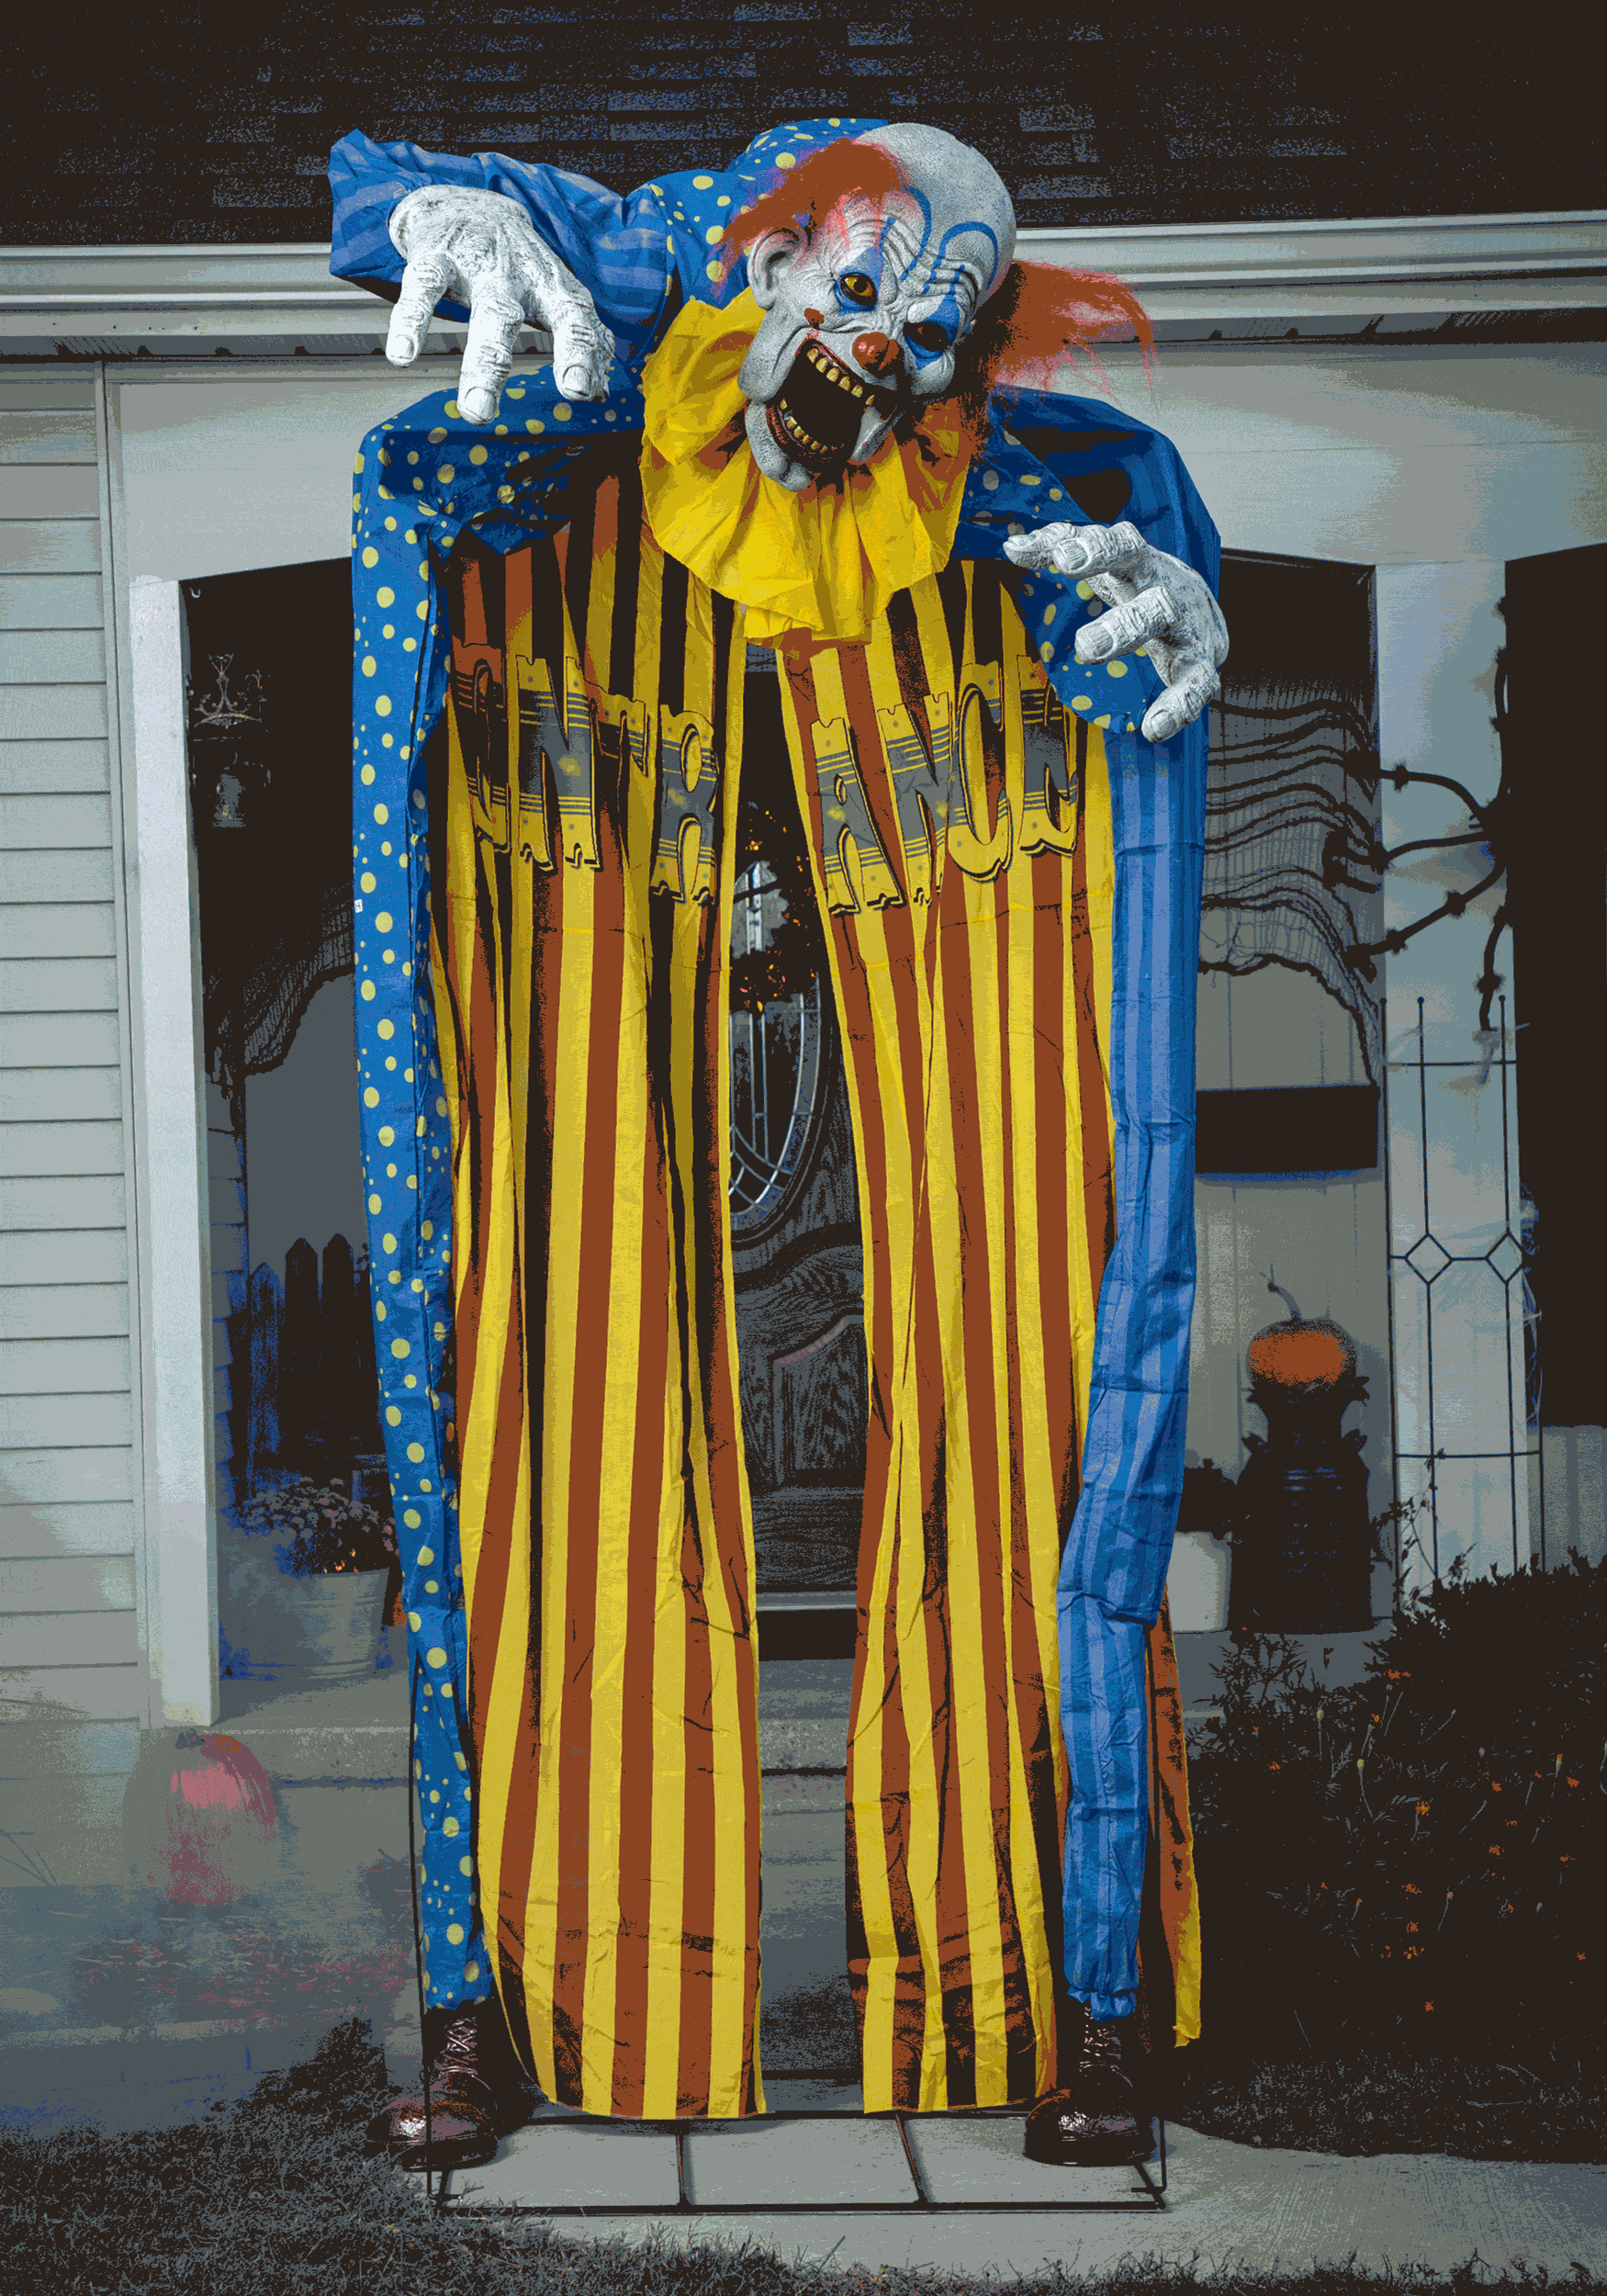 Looming Clown Animated Archway Doorway Halloween Carnival Circus Haunted House 